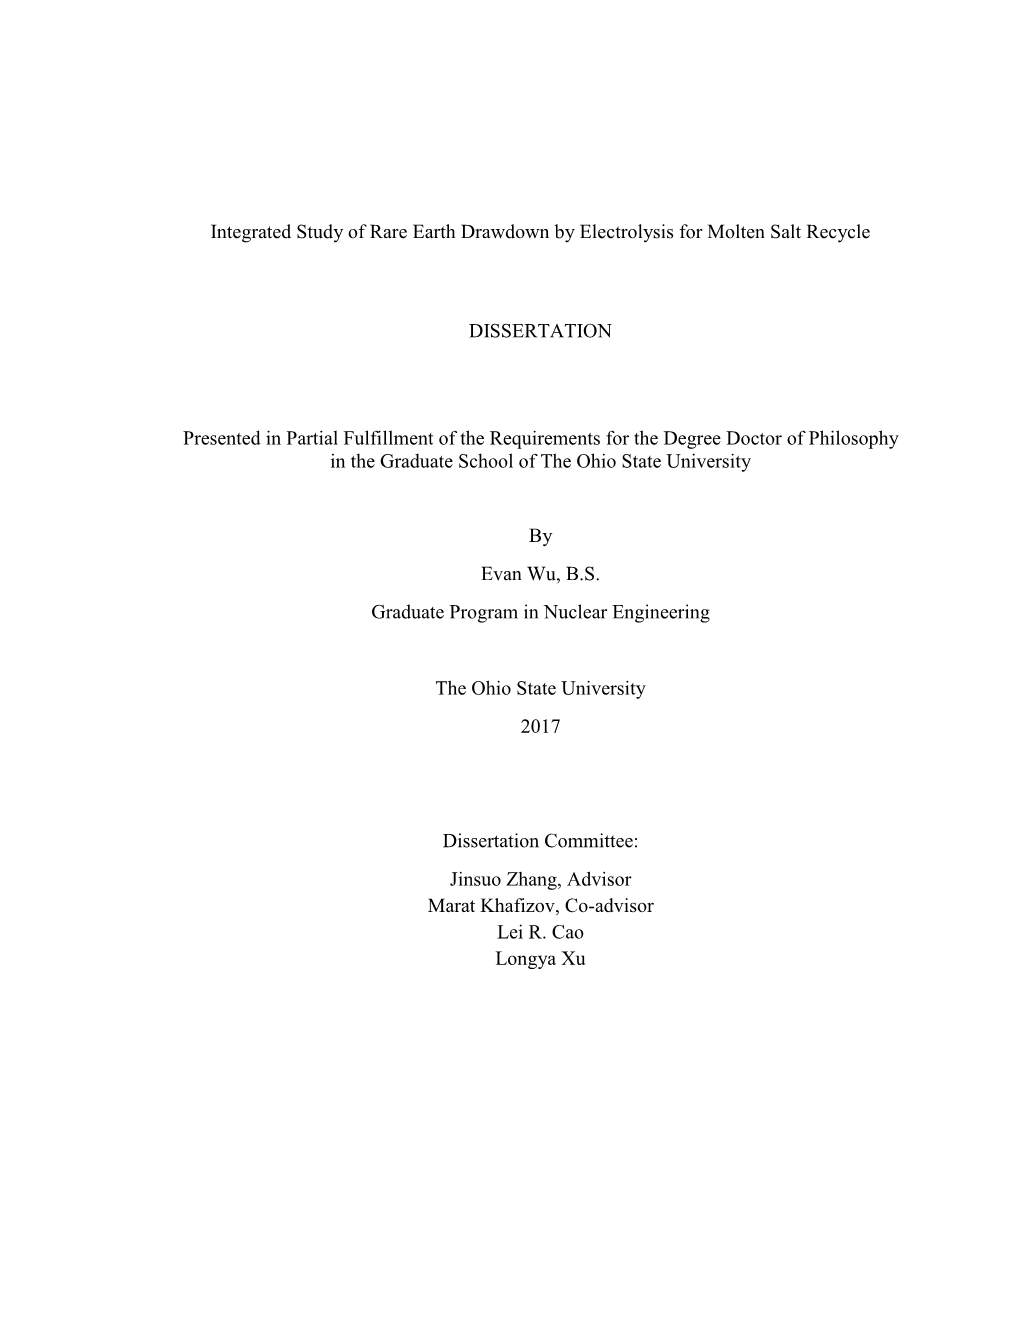 I Integrated Study of Rare Earth Drawdown by Electrolysis For